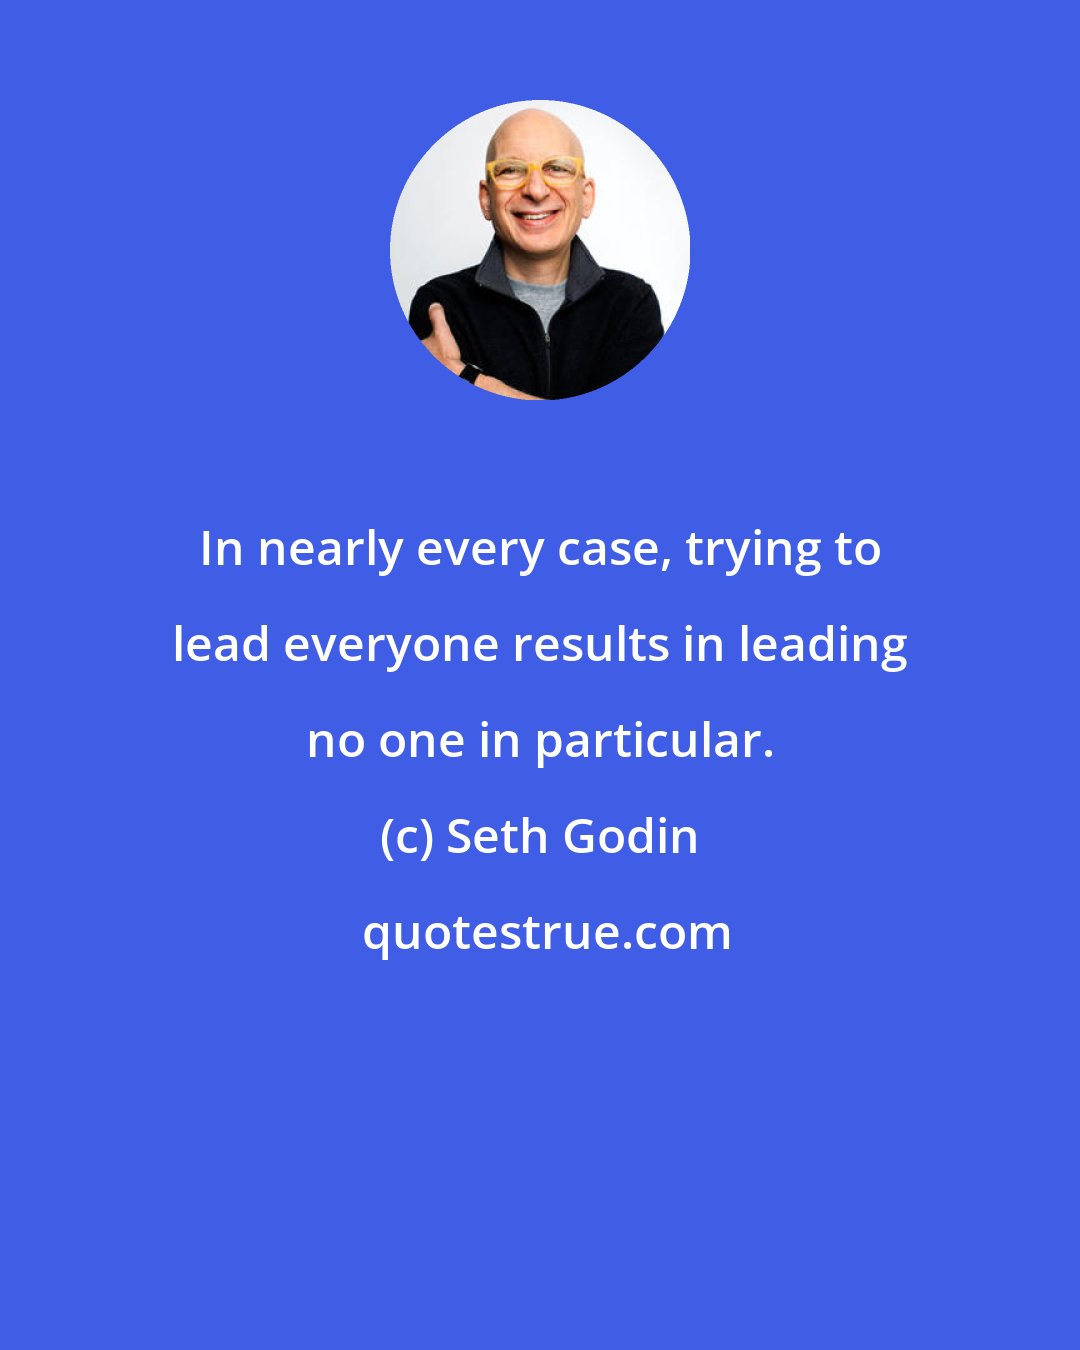 Seth Godin: In nearly every case, trying to lead everyone results in leading no one in particular.